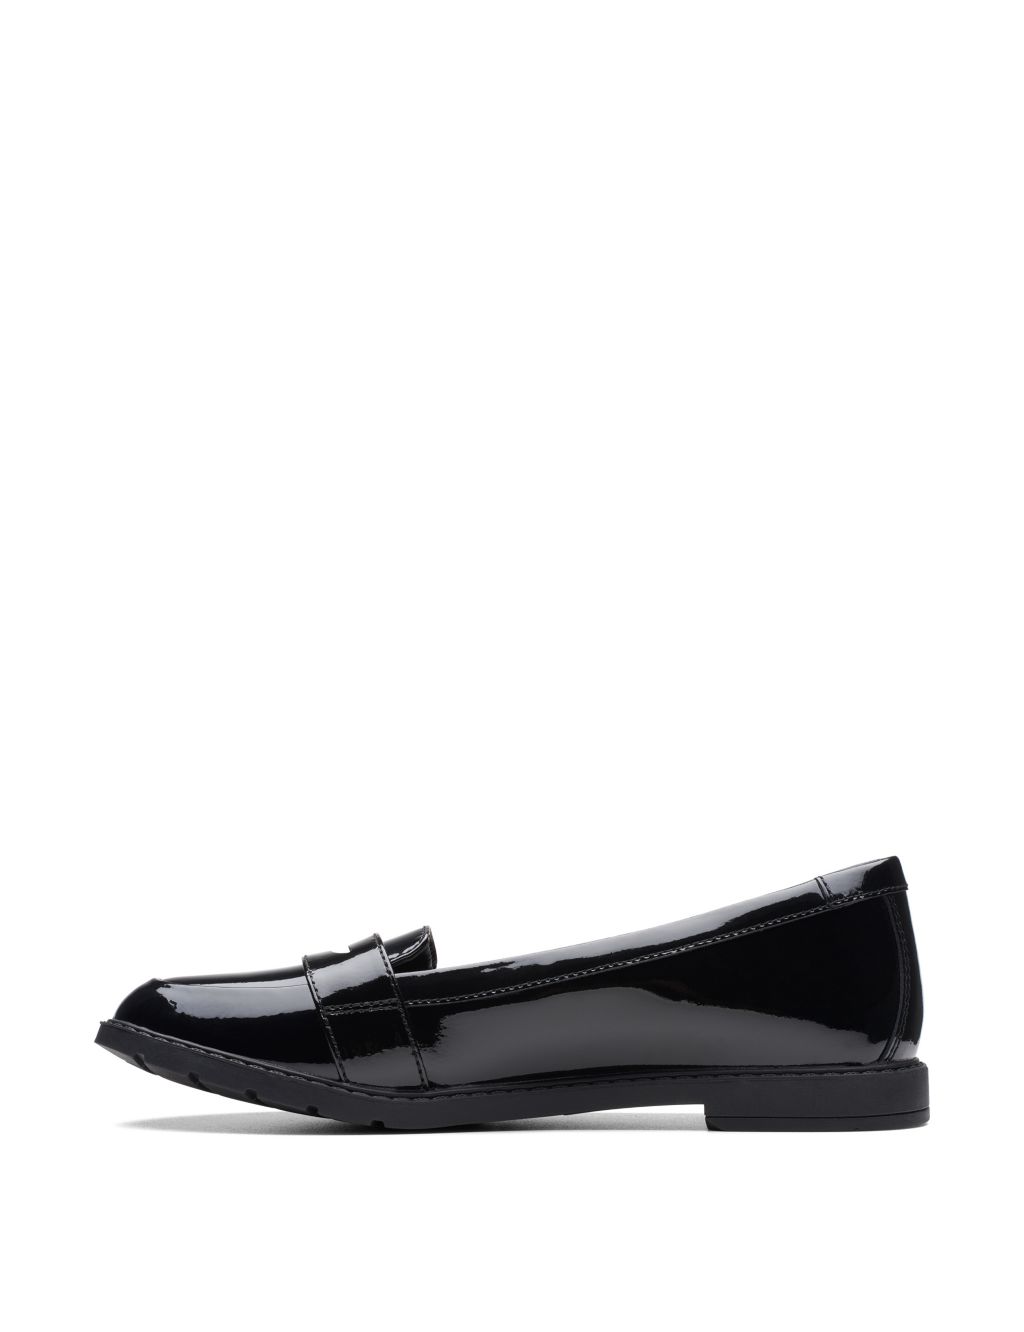 Kids' Patent Leather Slip-On Loafers (3 Small - 8 Small) image 6